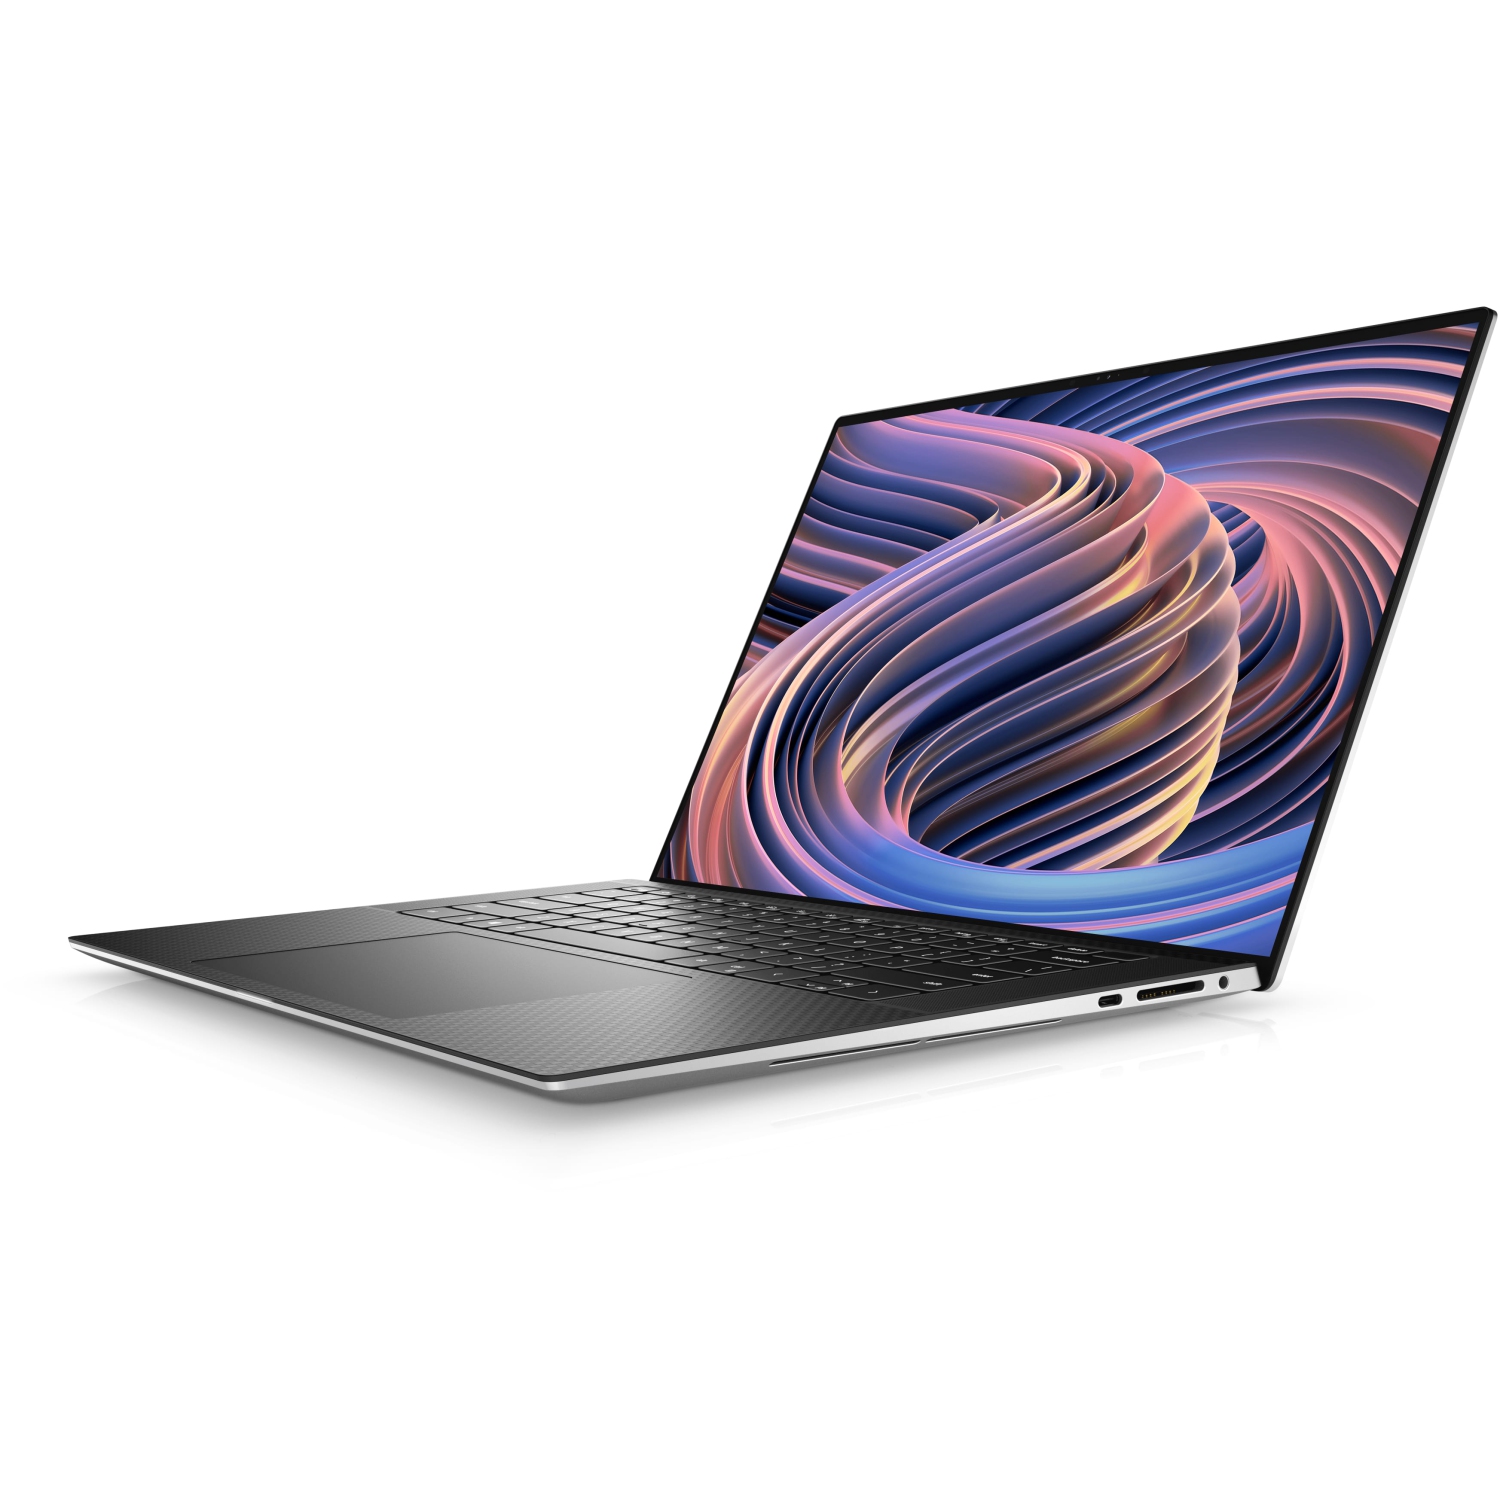 Refurbished (Excellent) – Dell XPS 9520 Laptop (2022) | 15.6" FHD+ | Core i7 - 512GB SSD - 16GB RAM - RTX 3050 | 14 Cores @ 4.7 GHz - 12th Gen CPU